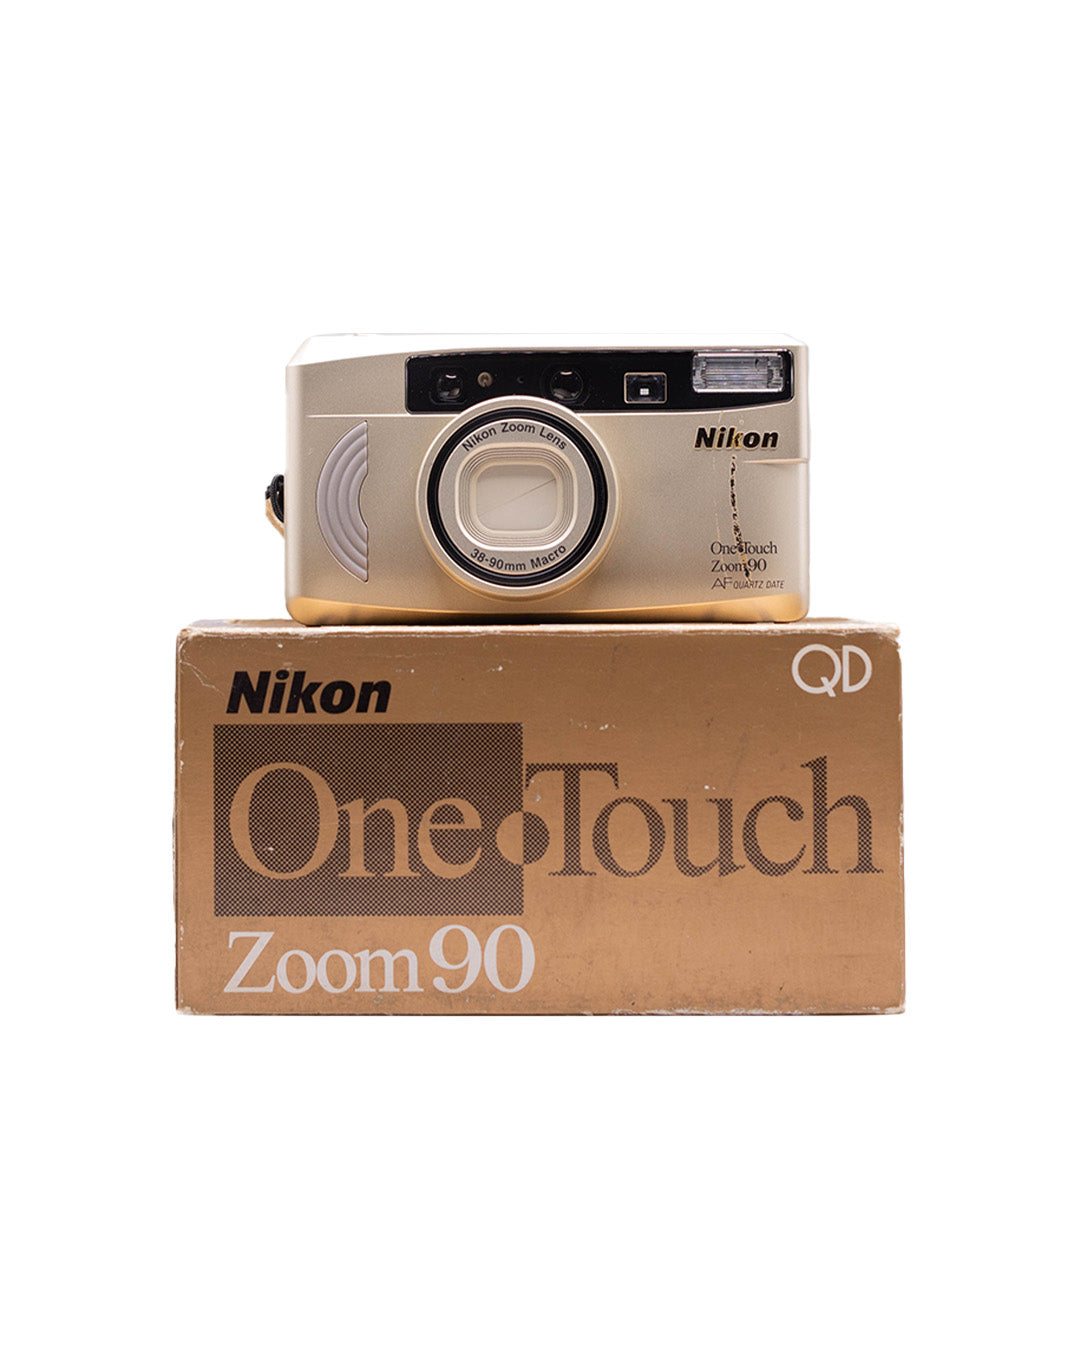 *NEW Nikon One Touch Zoom 90 Point & Shoot Camera with 38-90mm lens f/4.8-10.5